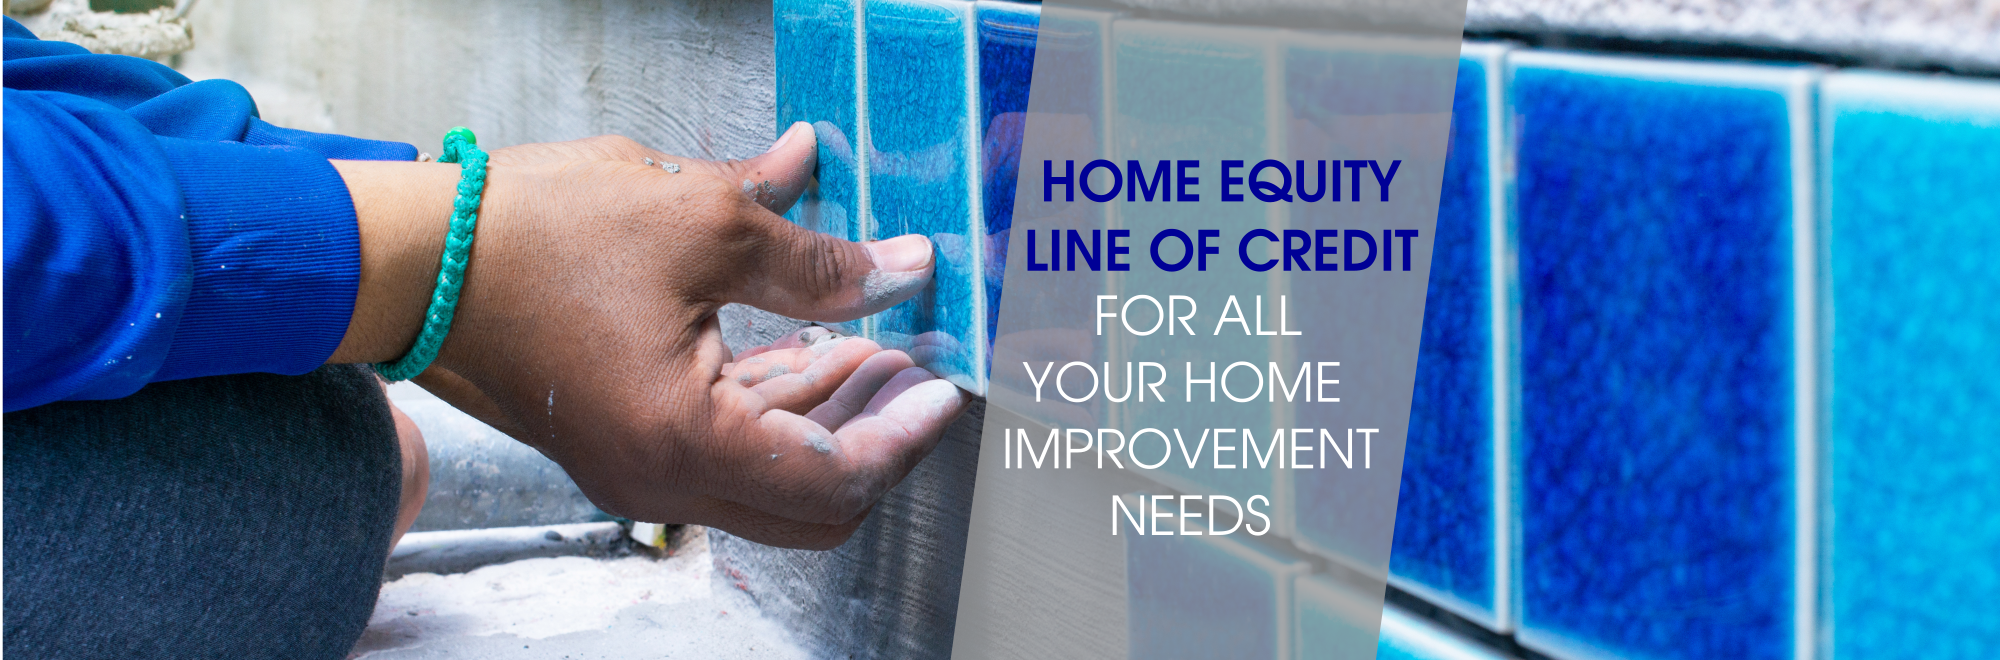 Home Equity Line of Credit For all your home improvement needs